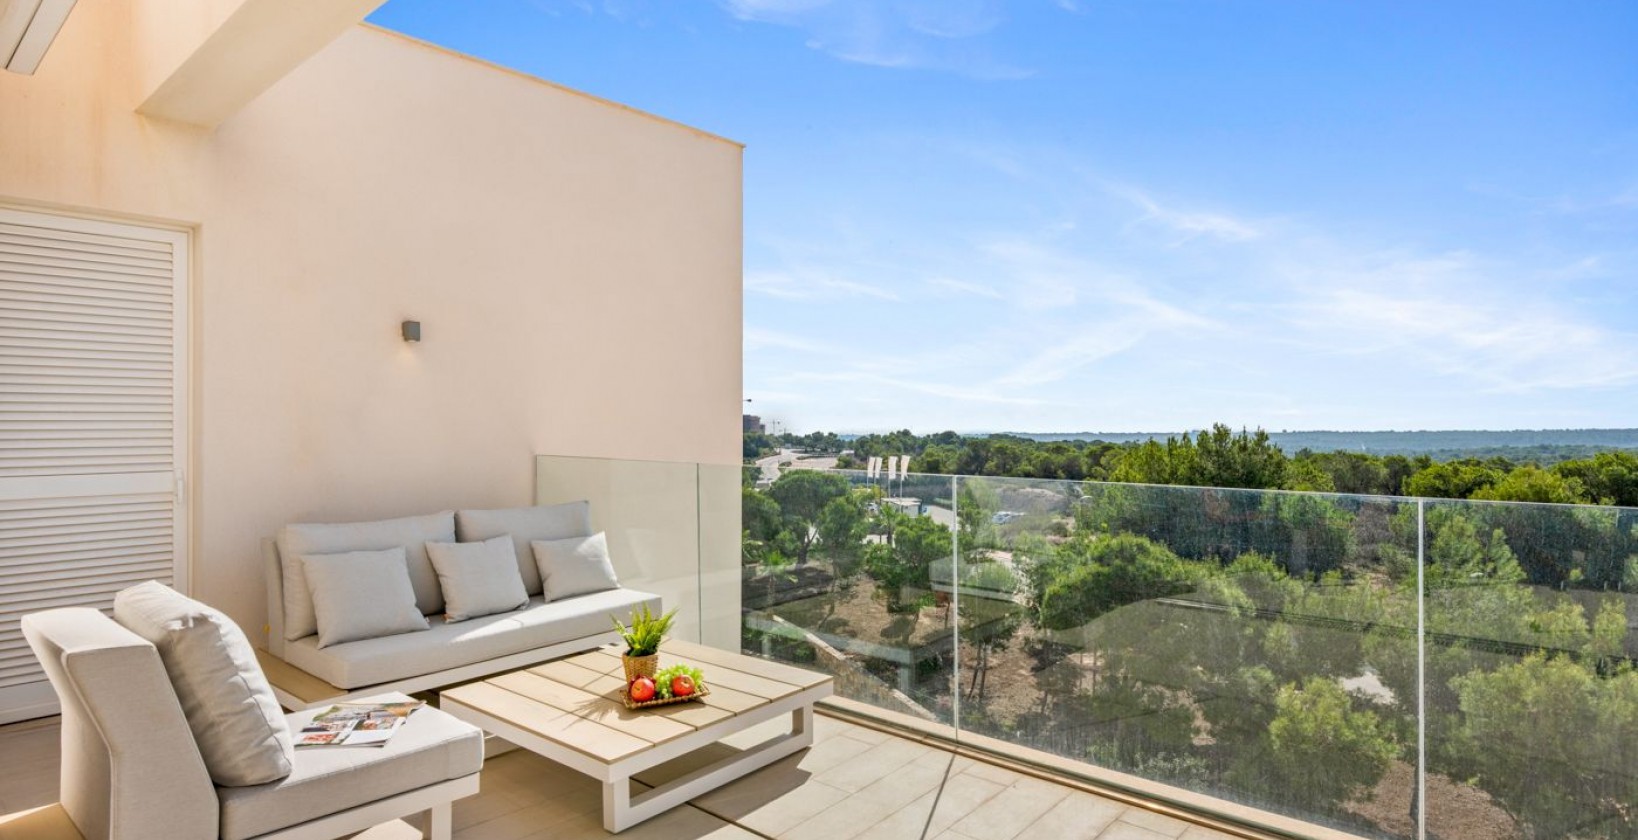 Resale - Apartment / flat - Las Colinas Golf & Country Club